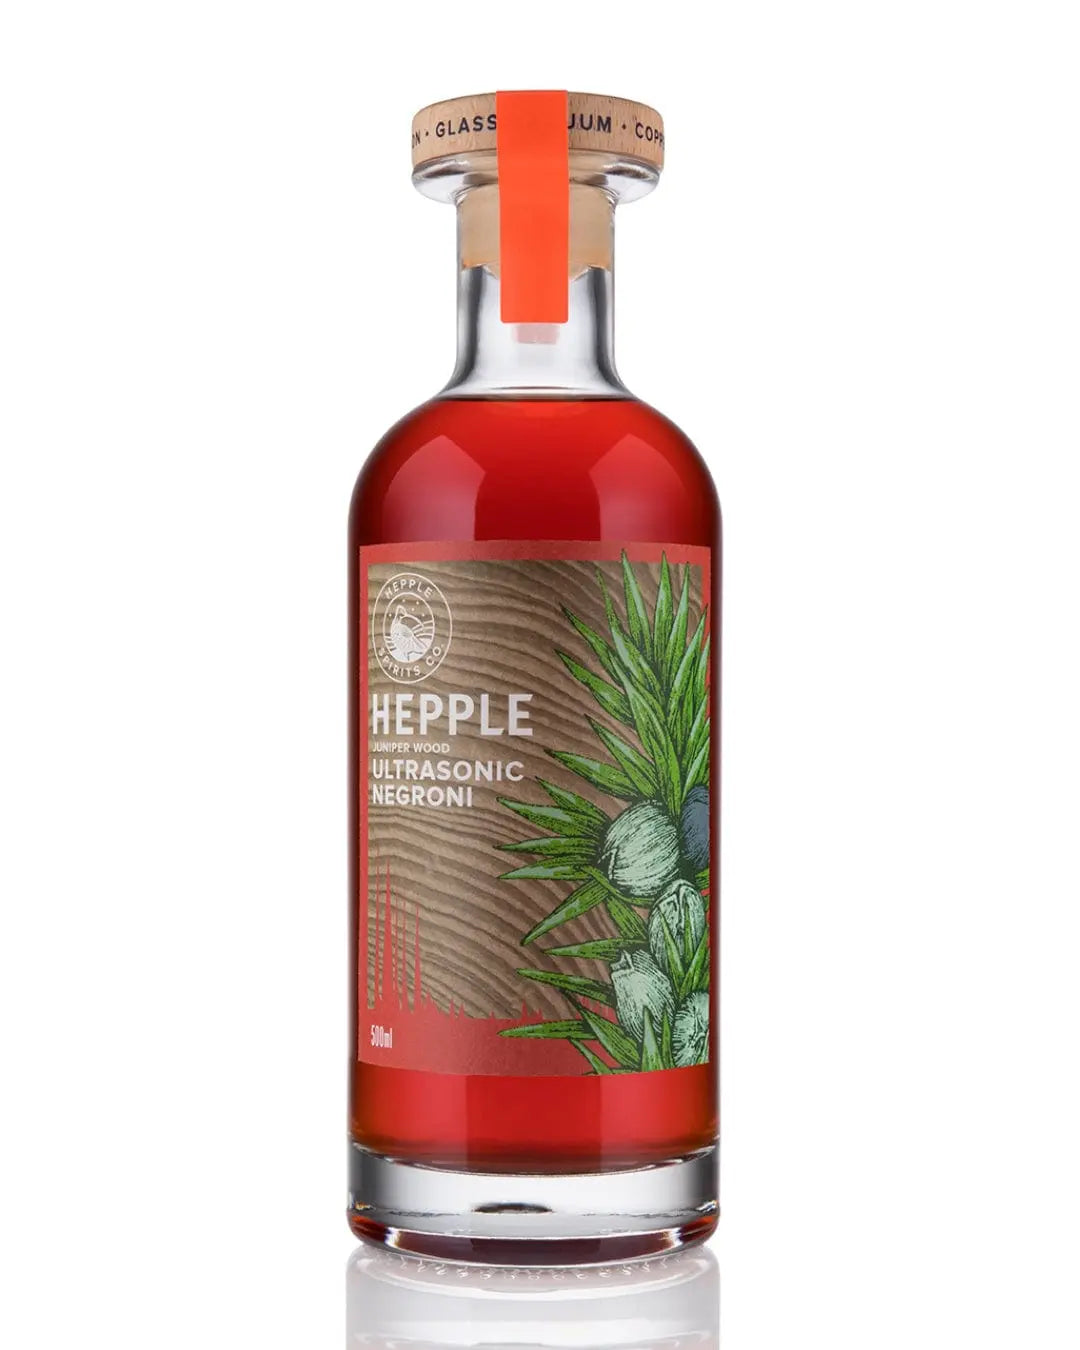 Hepple Ultrasonic Negroni, 50 cl Ready Made Cocktails 5 060559 860109